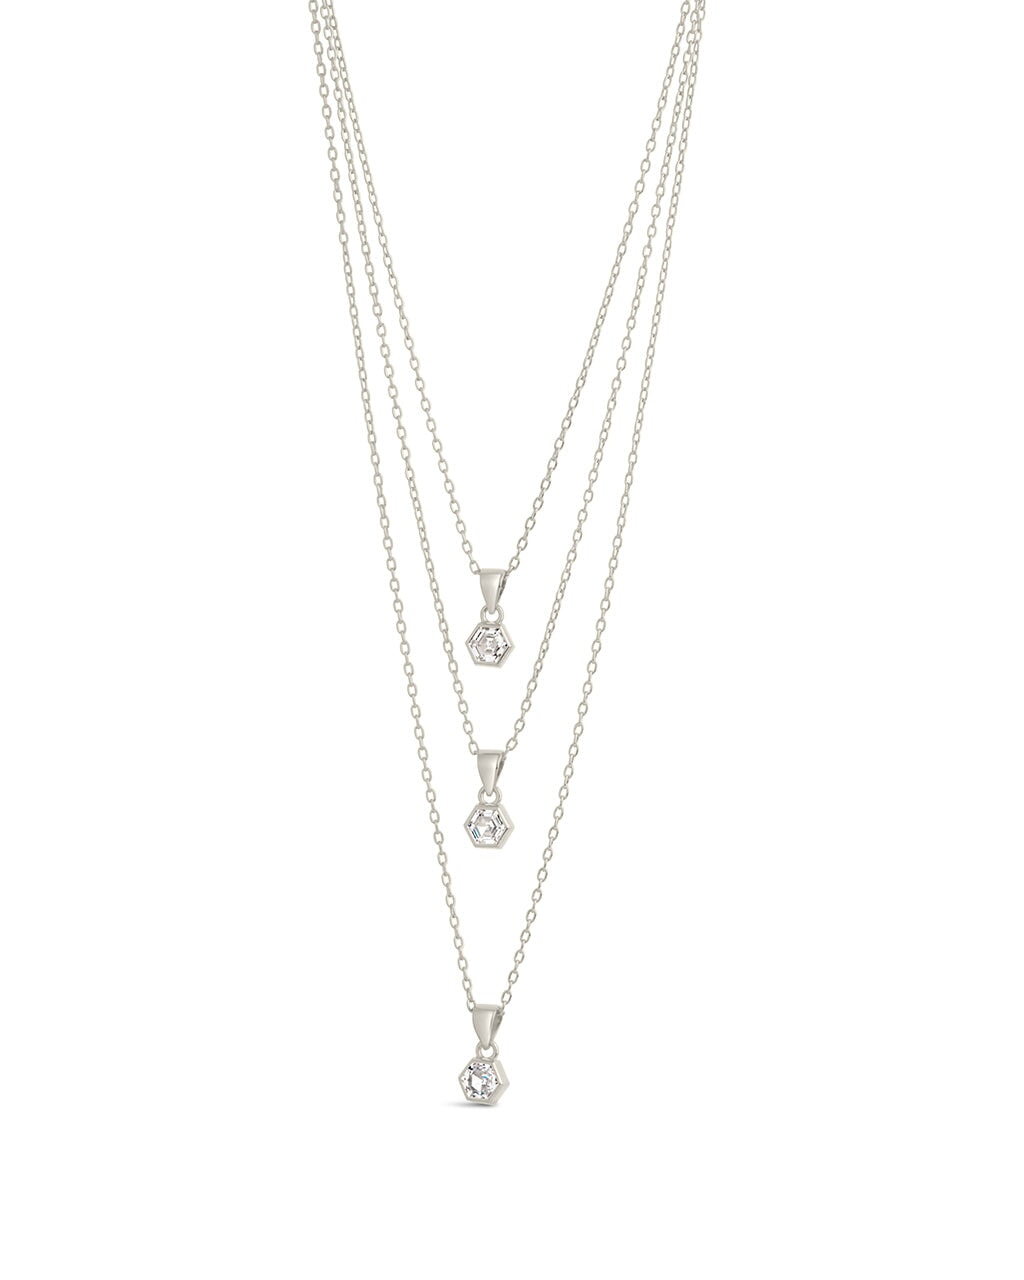 Gia Layered Necklace Necklace Sterling Forever Silver 